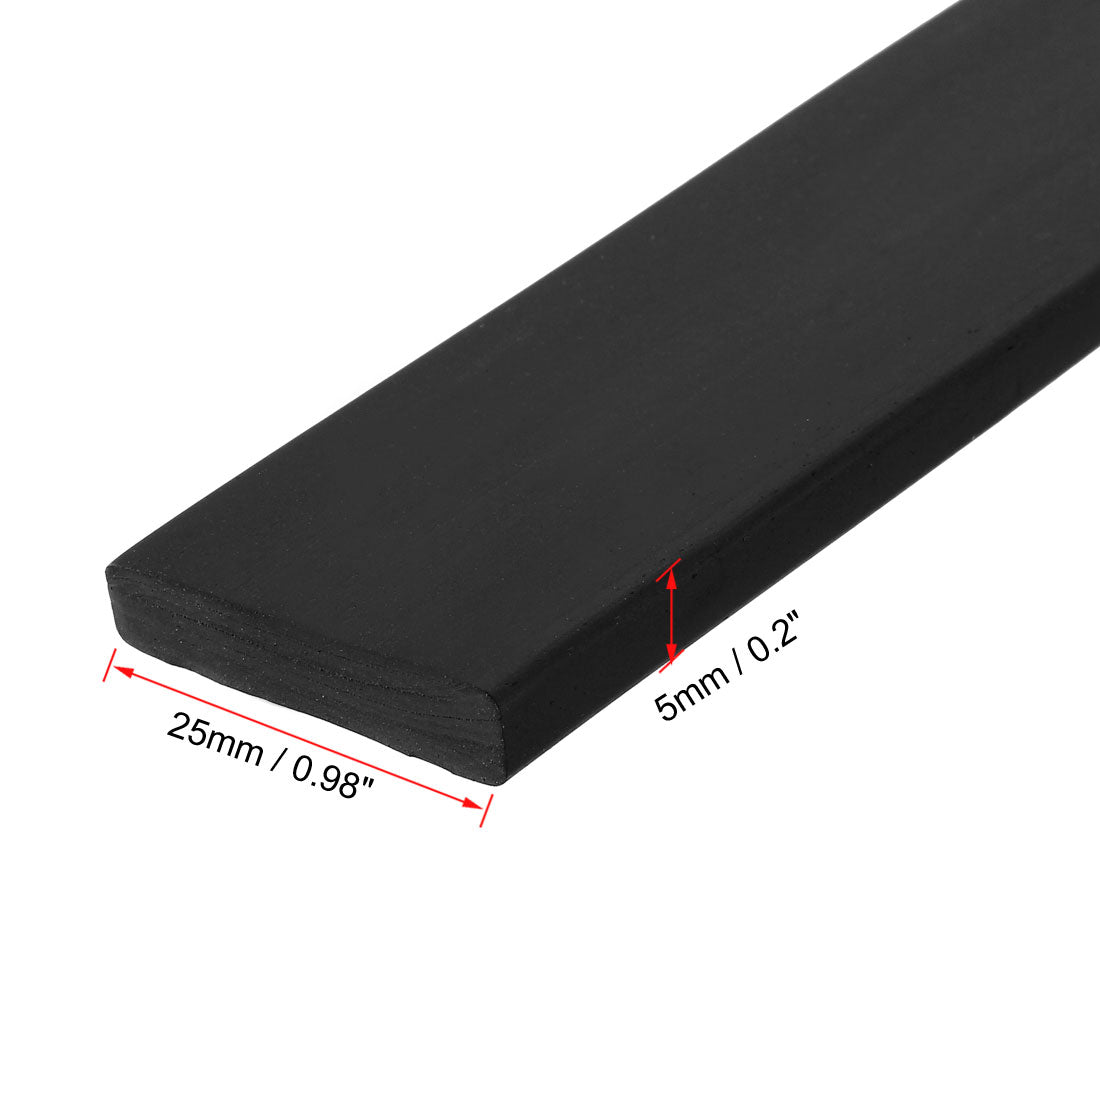 uxcell Uxcell Solid Rectangle Rubber Seal Strip 25mm Wide 5mm Thick, 3 Meters Long Black